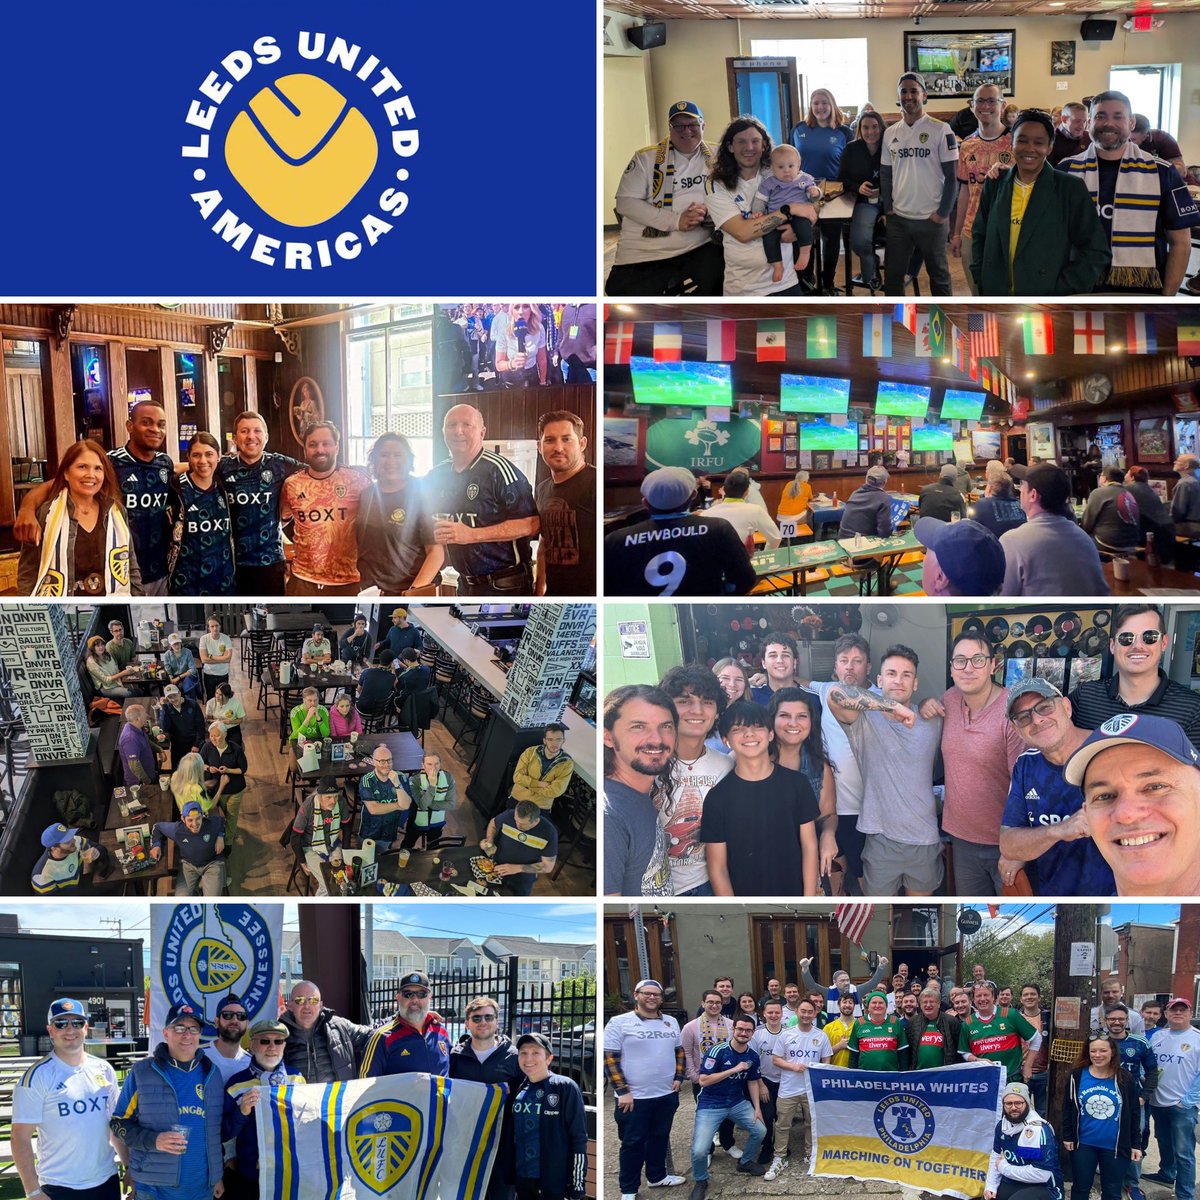 16 meetups across the US and Canada yesterday to watch the Coventry game. Sign up at luamericas.com/join for emails from your local group. New US groups coming soon!